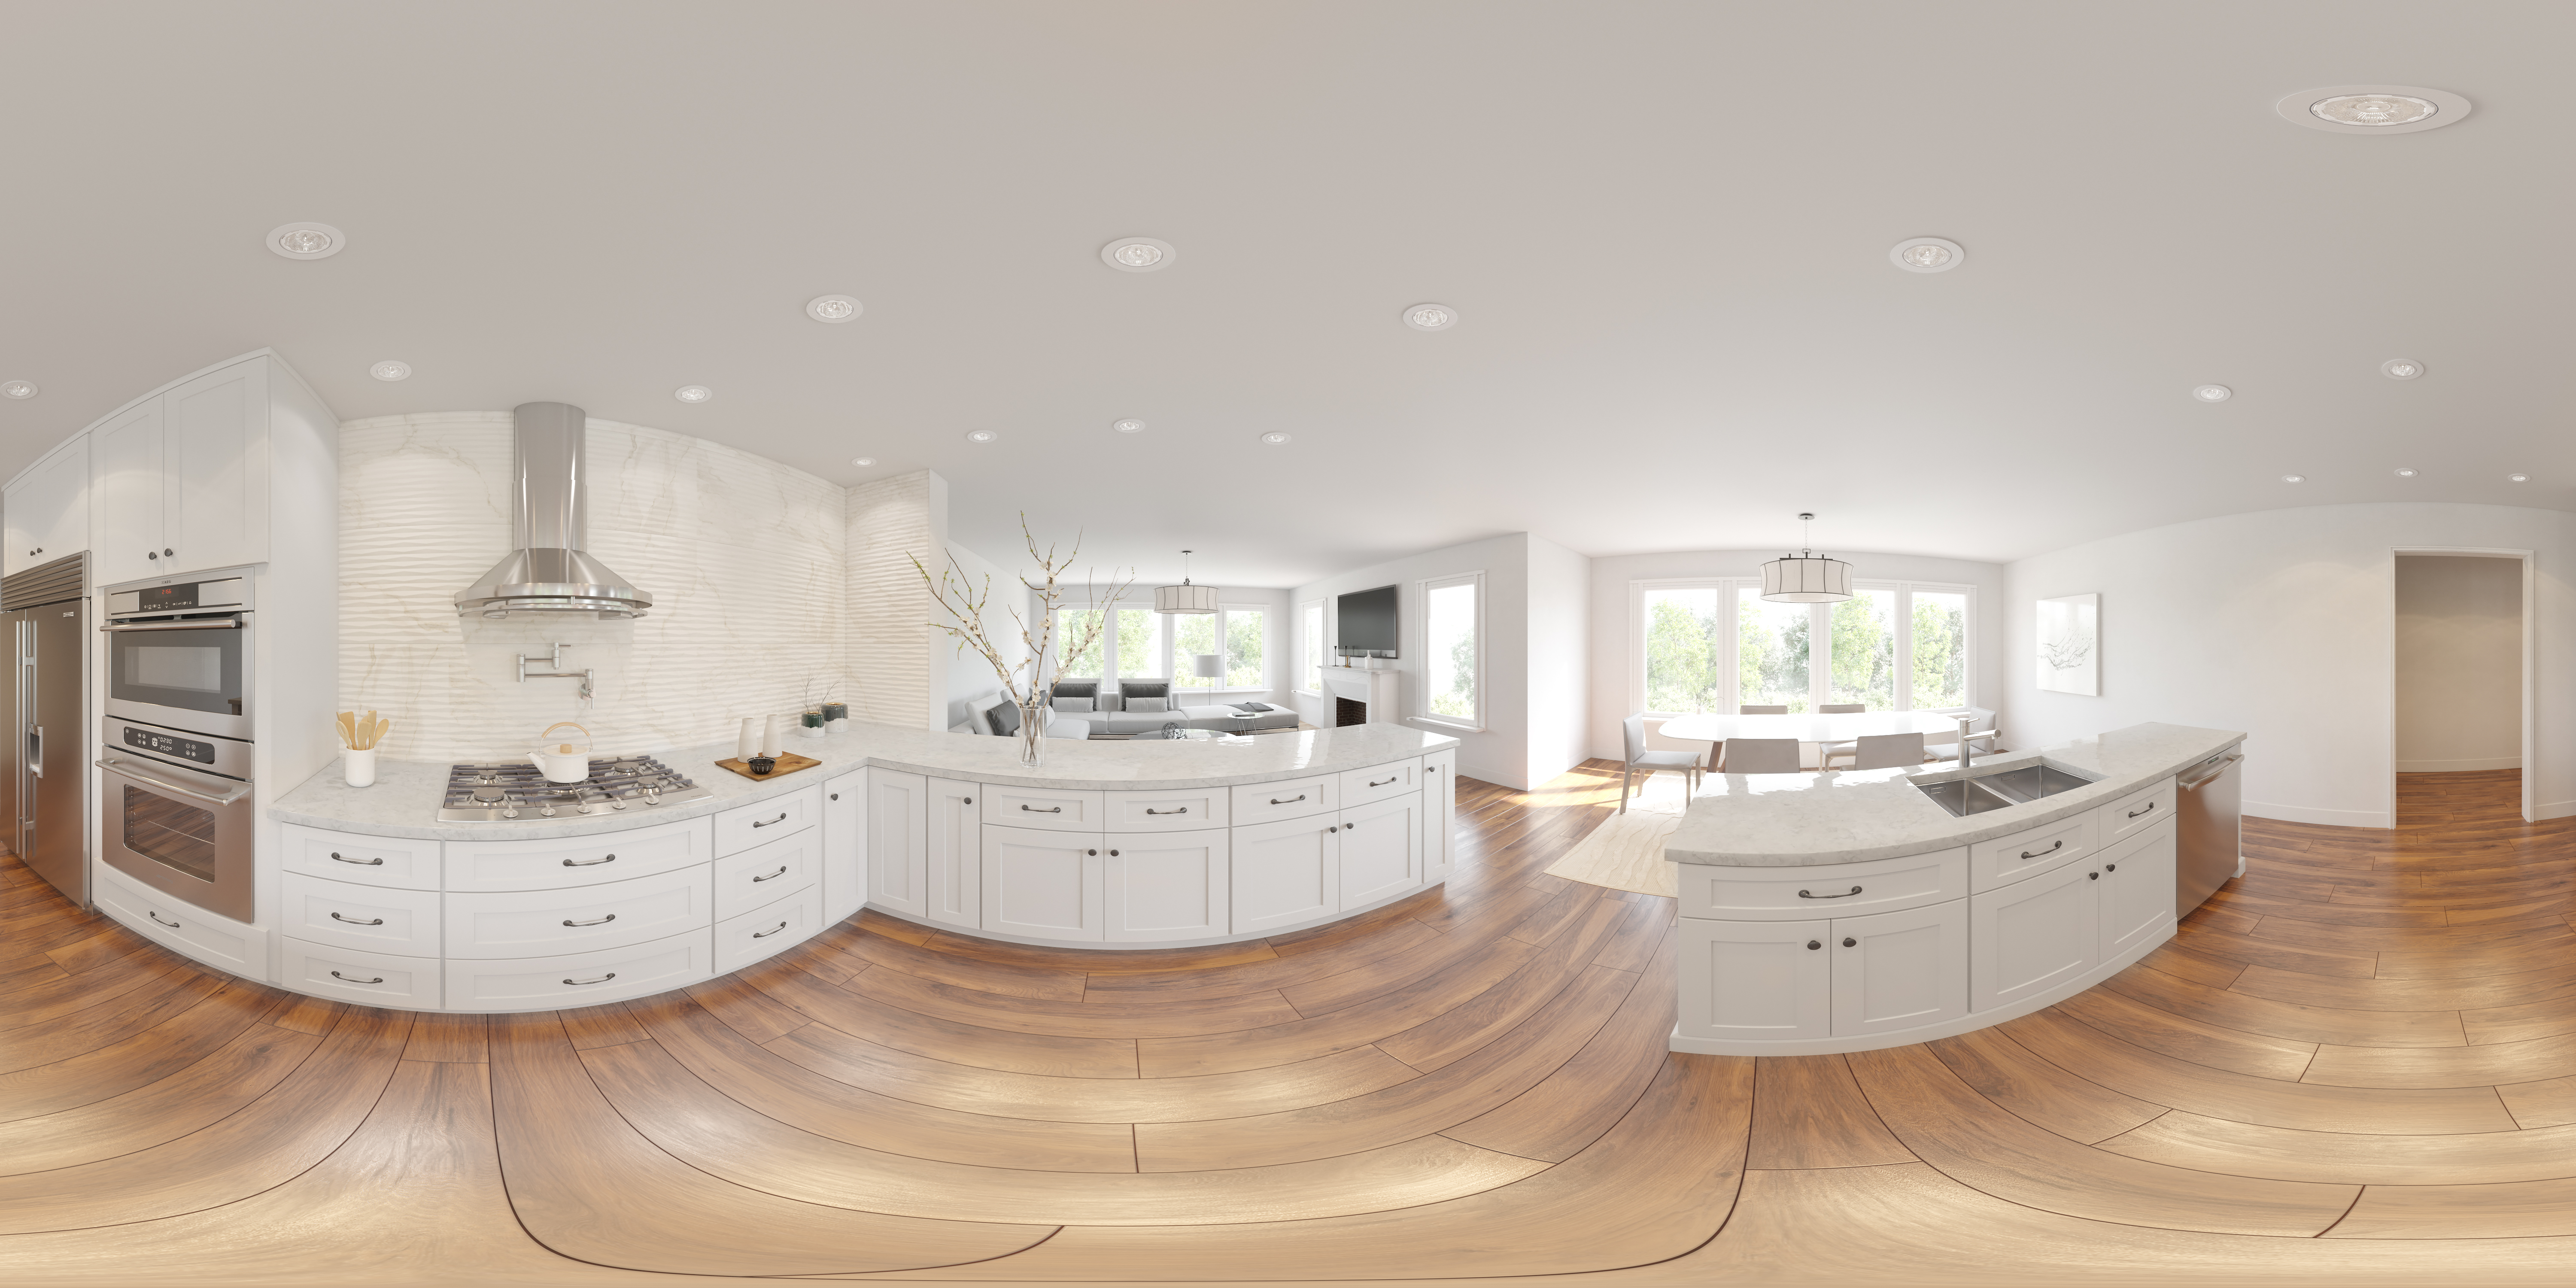 360 Degree Kitchen 3D Rendering Experience - Addo Visualization